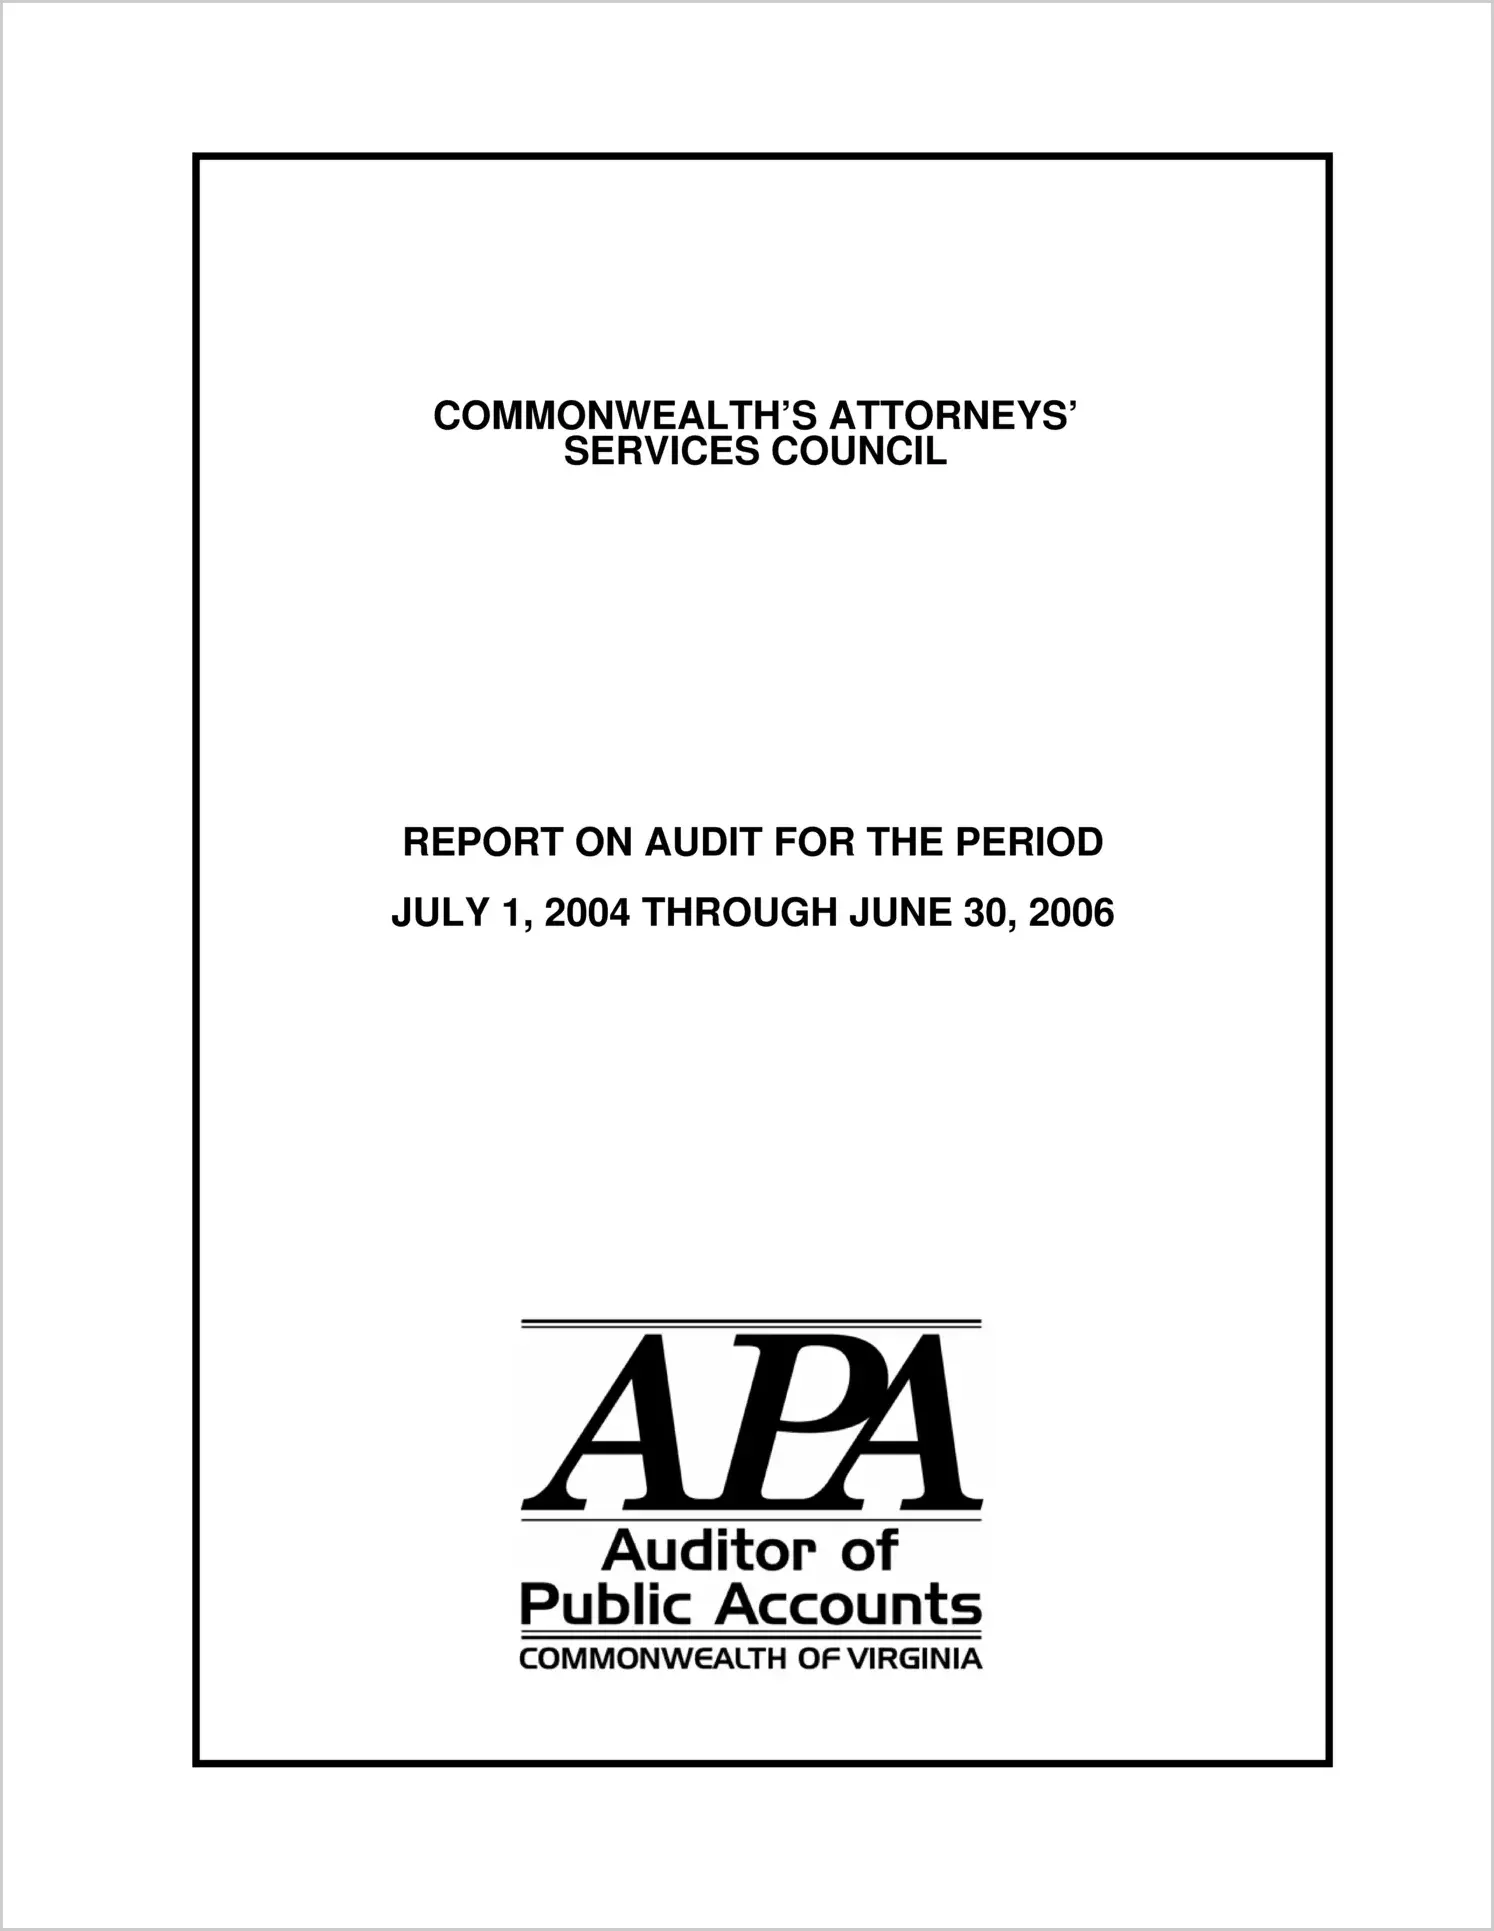 Commonwealth Attorneys` Services Council for the period July 1, 2004 through June 30, 2006